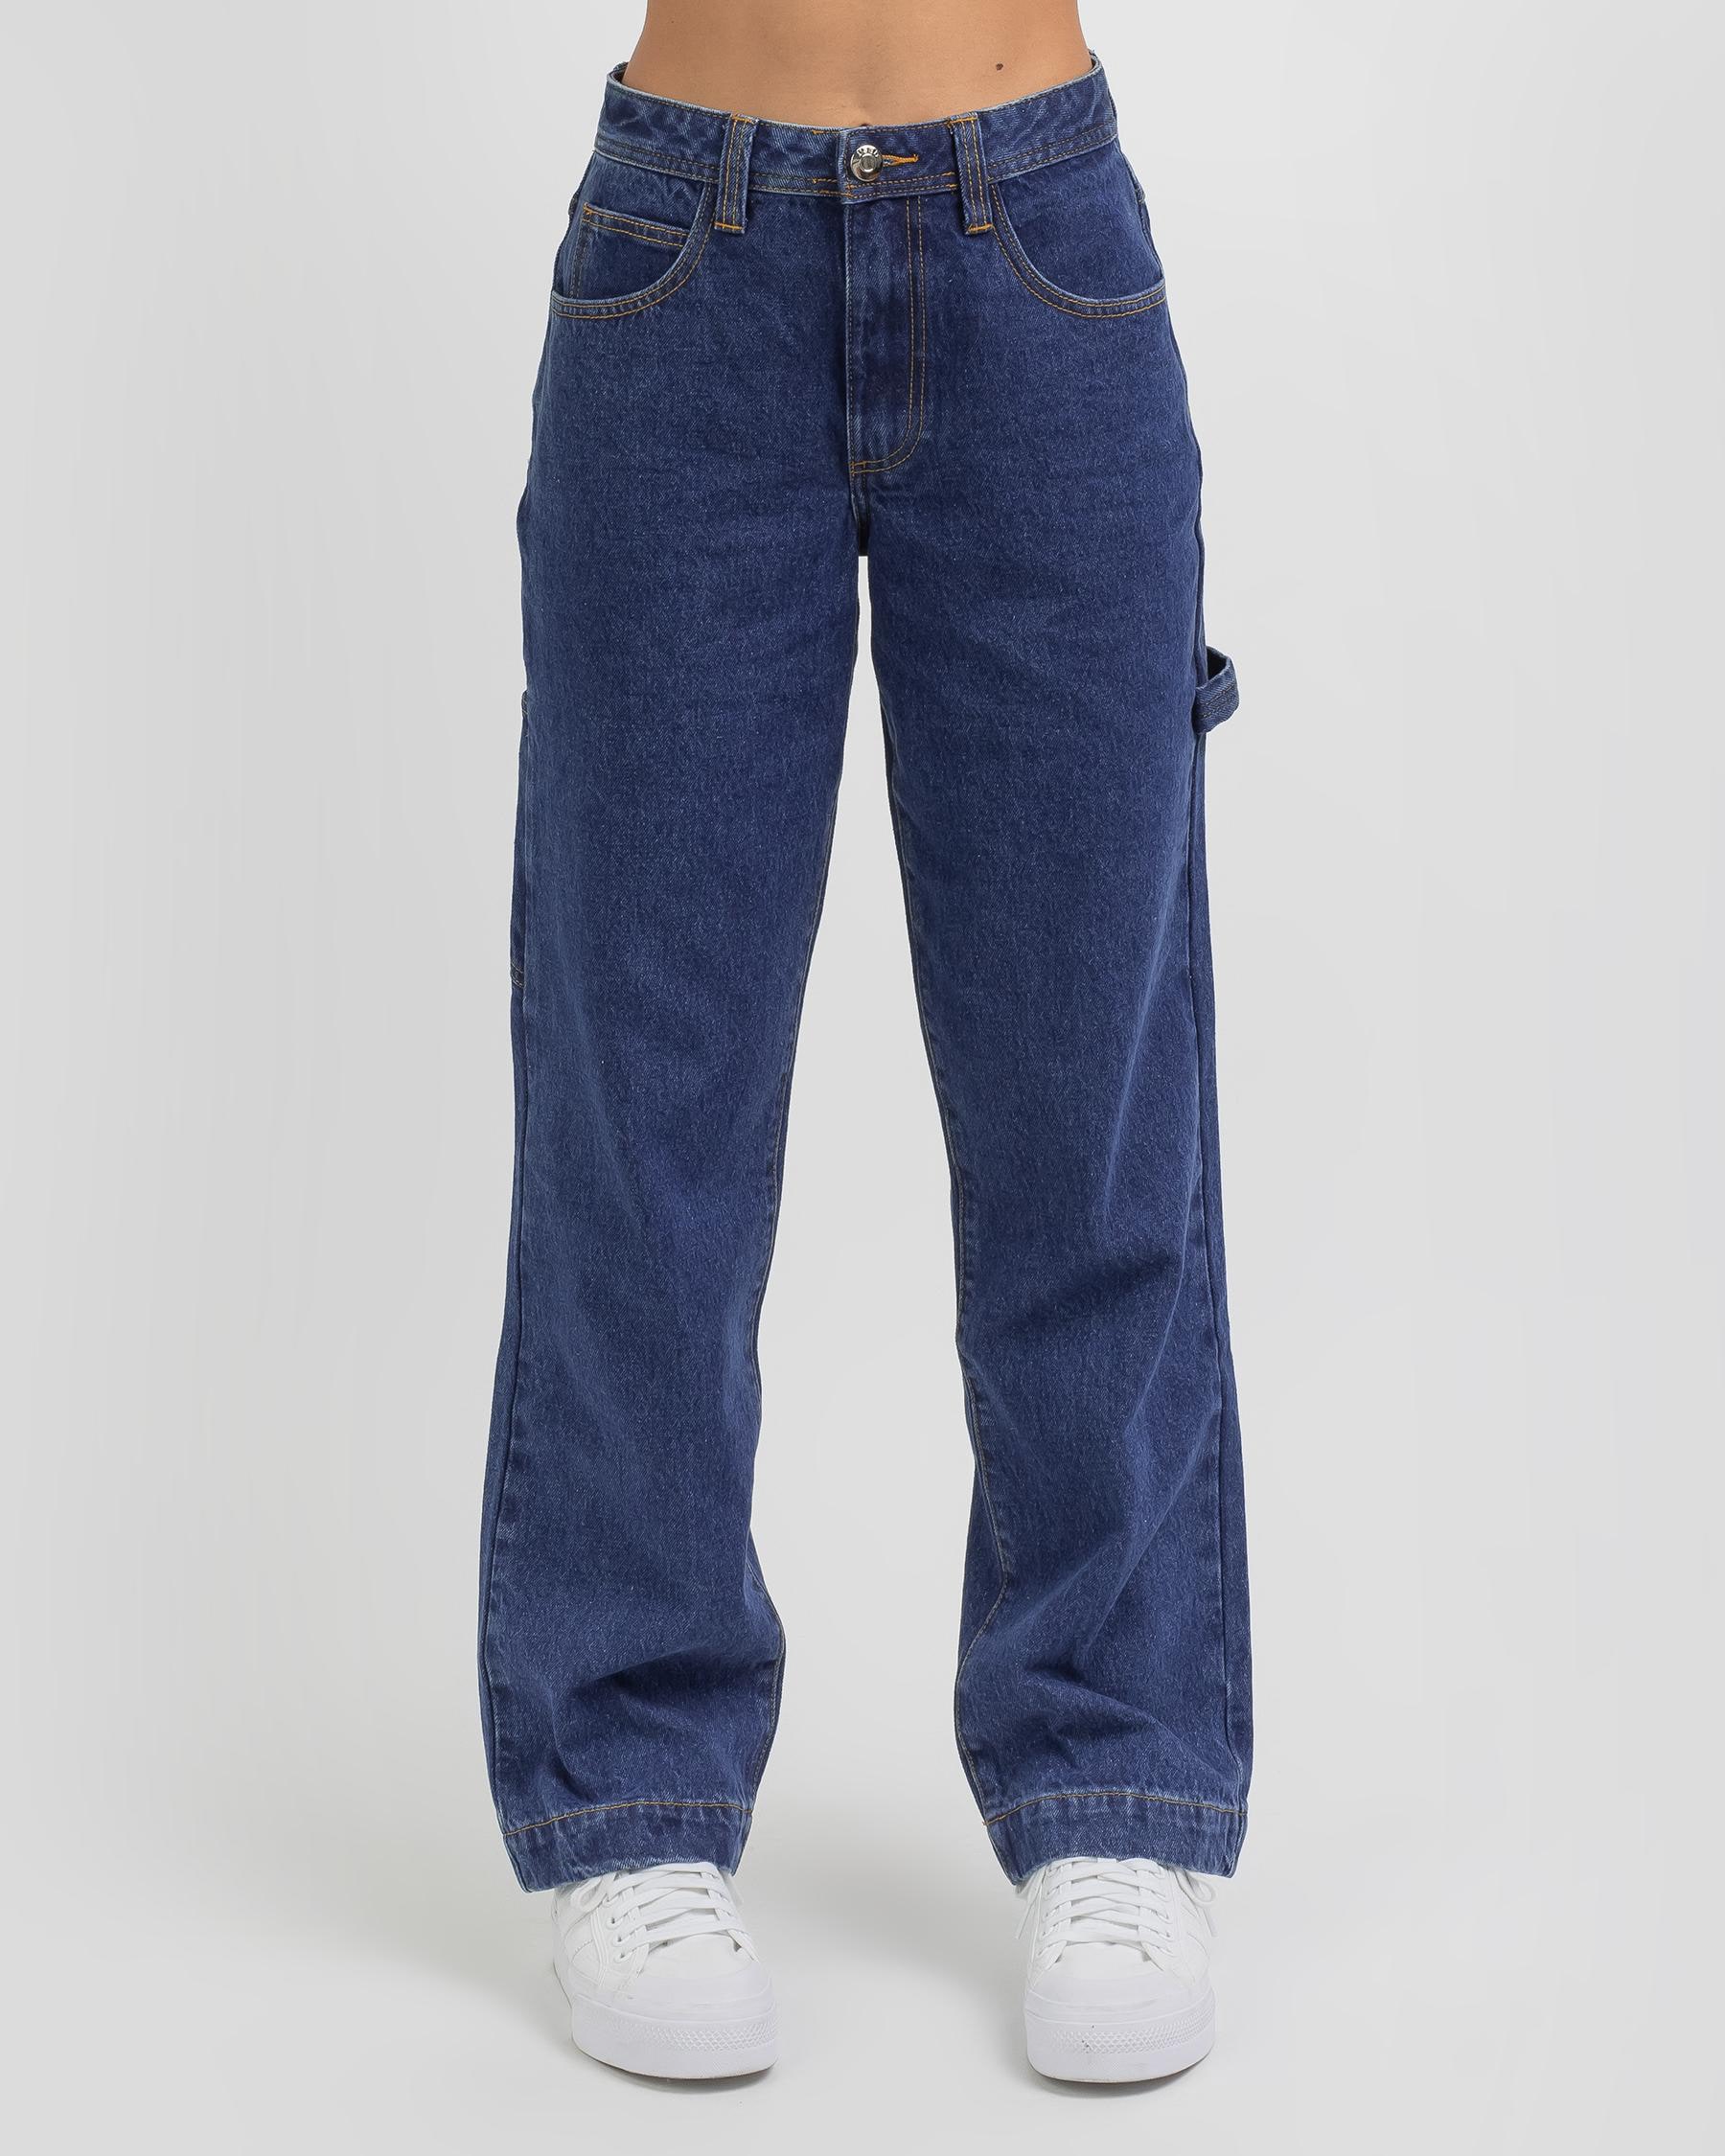 Used Ice Wide Leg Jeans In Indigo - Fast Shipping & Easy Returns - City ...